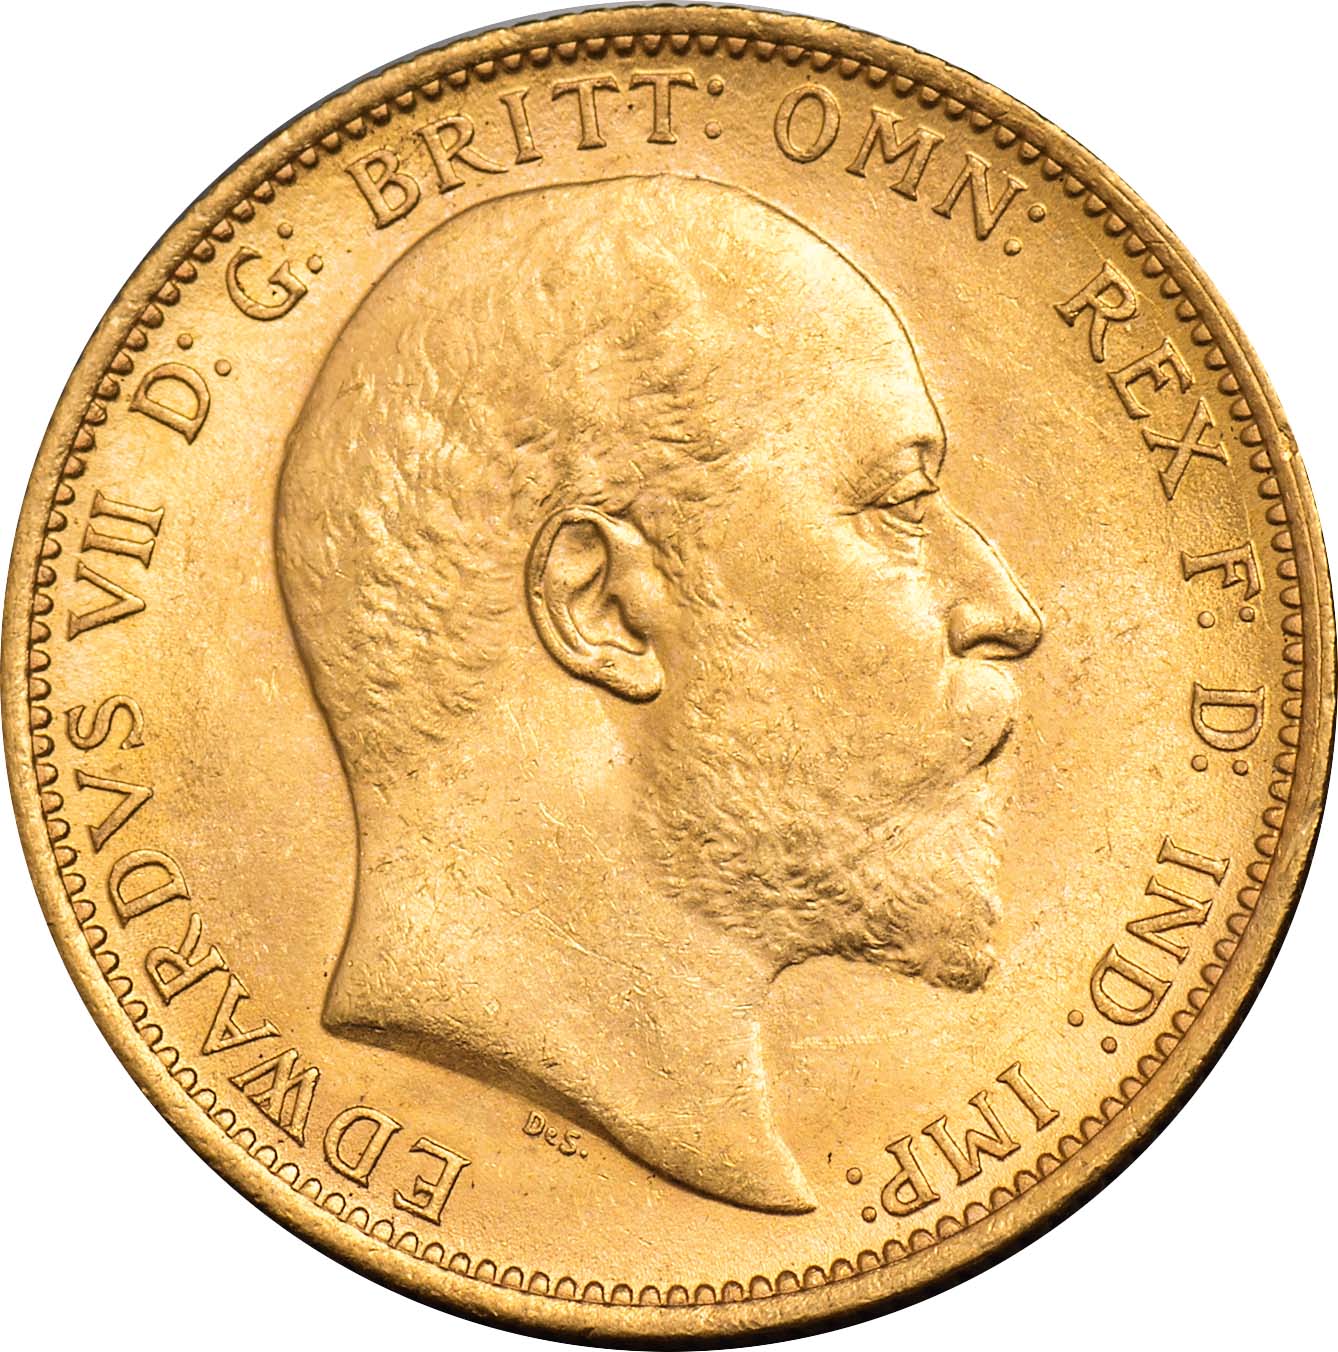 G  Edward VII, sovereign, 1902S, bare head r., rev. St. George and the dragon, S above date (S.3973;